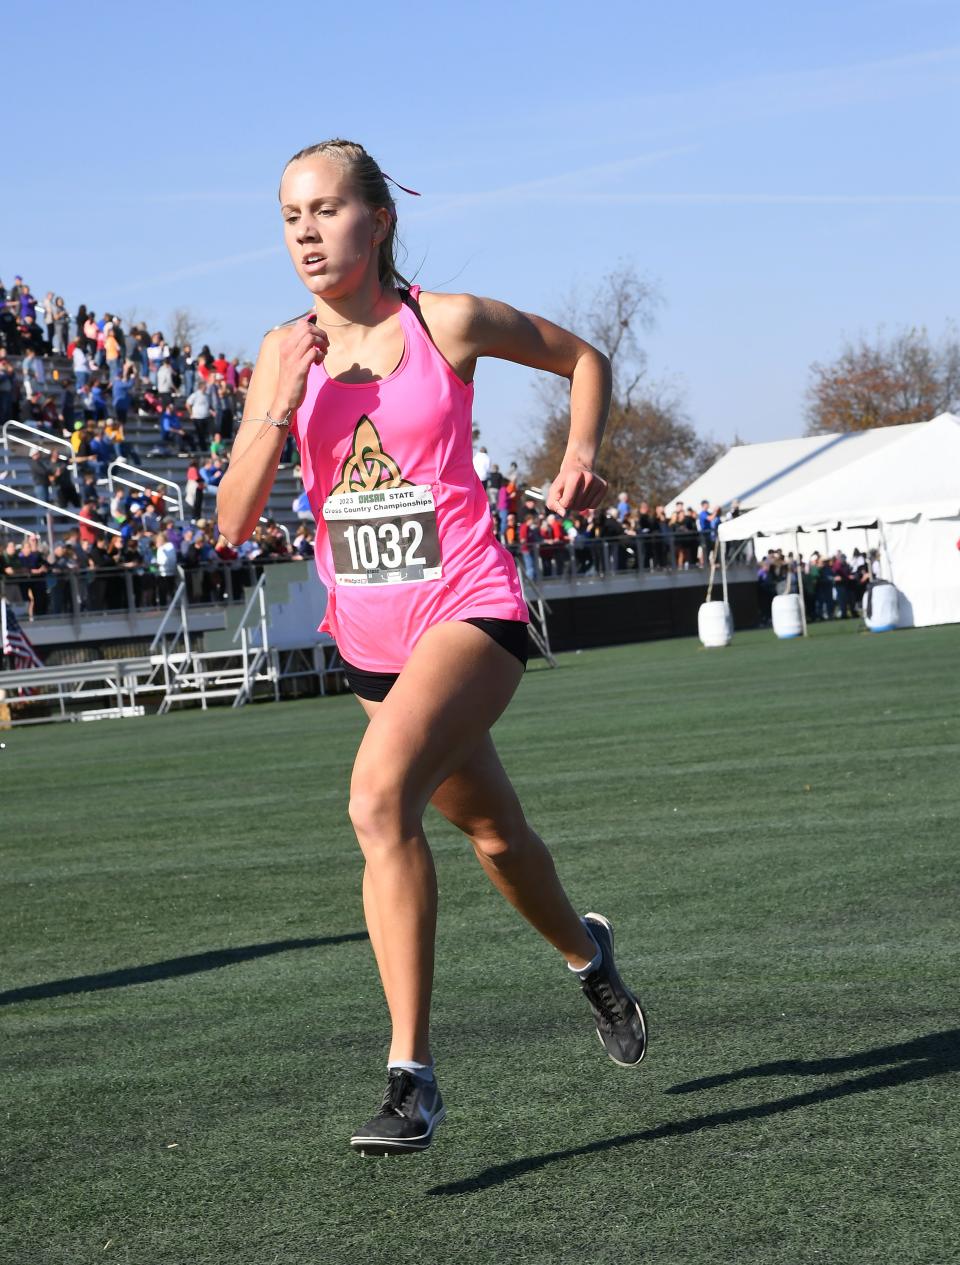 Dublin Jerome's Natalie Fouts placed third in Division I.